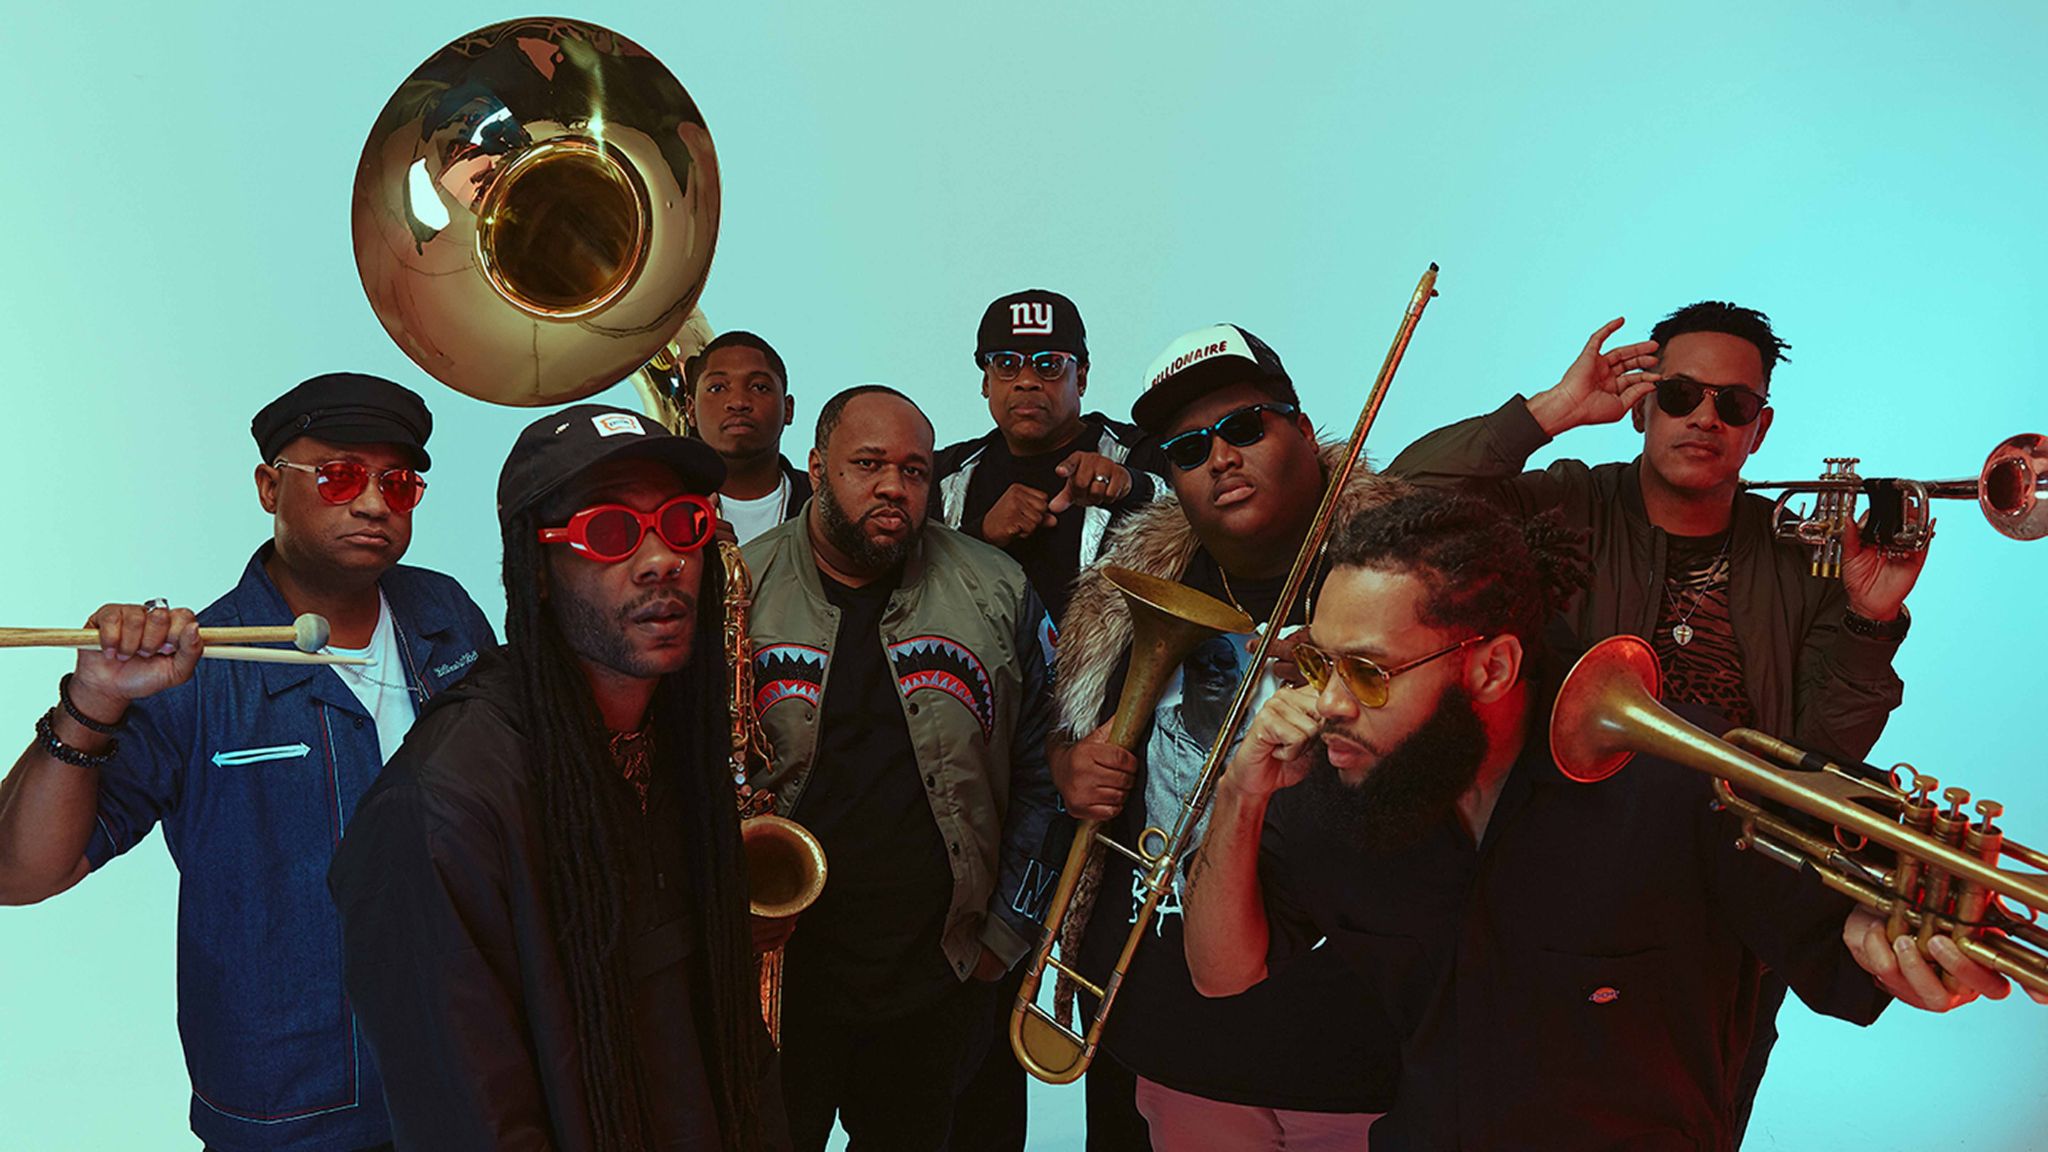 The Soul Rebels in Portsmouth event information